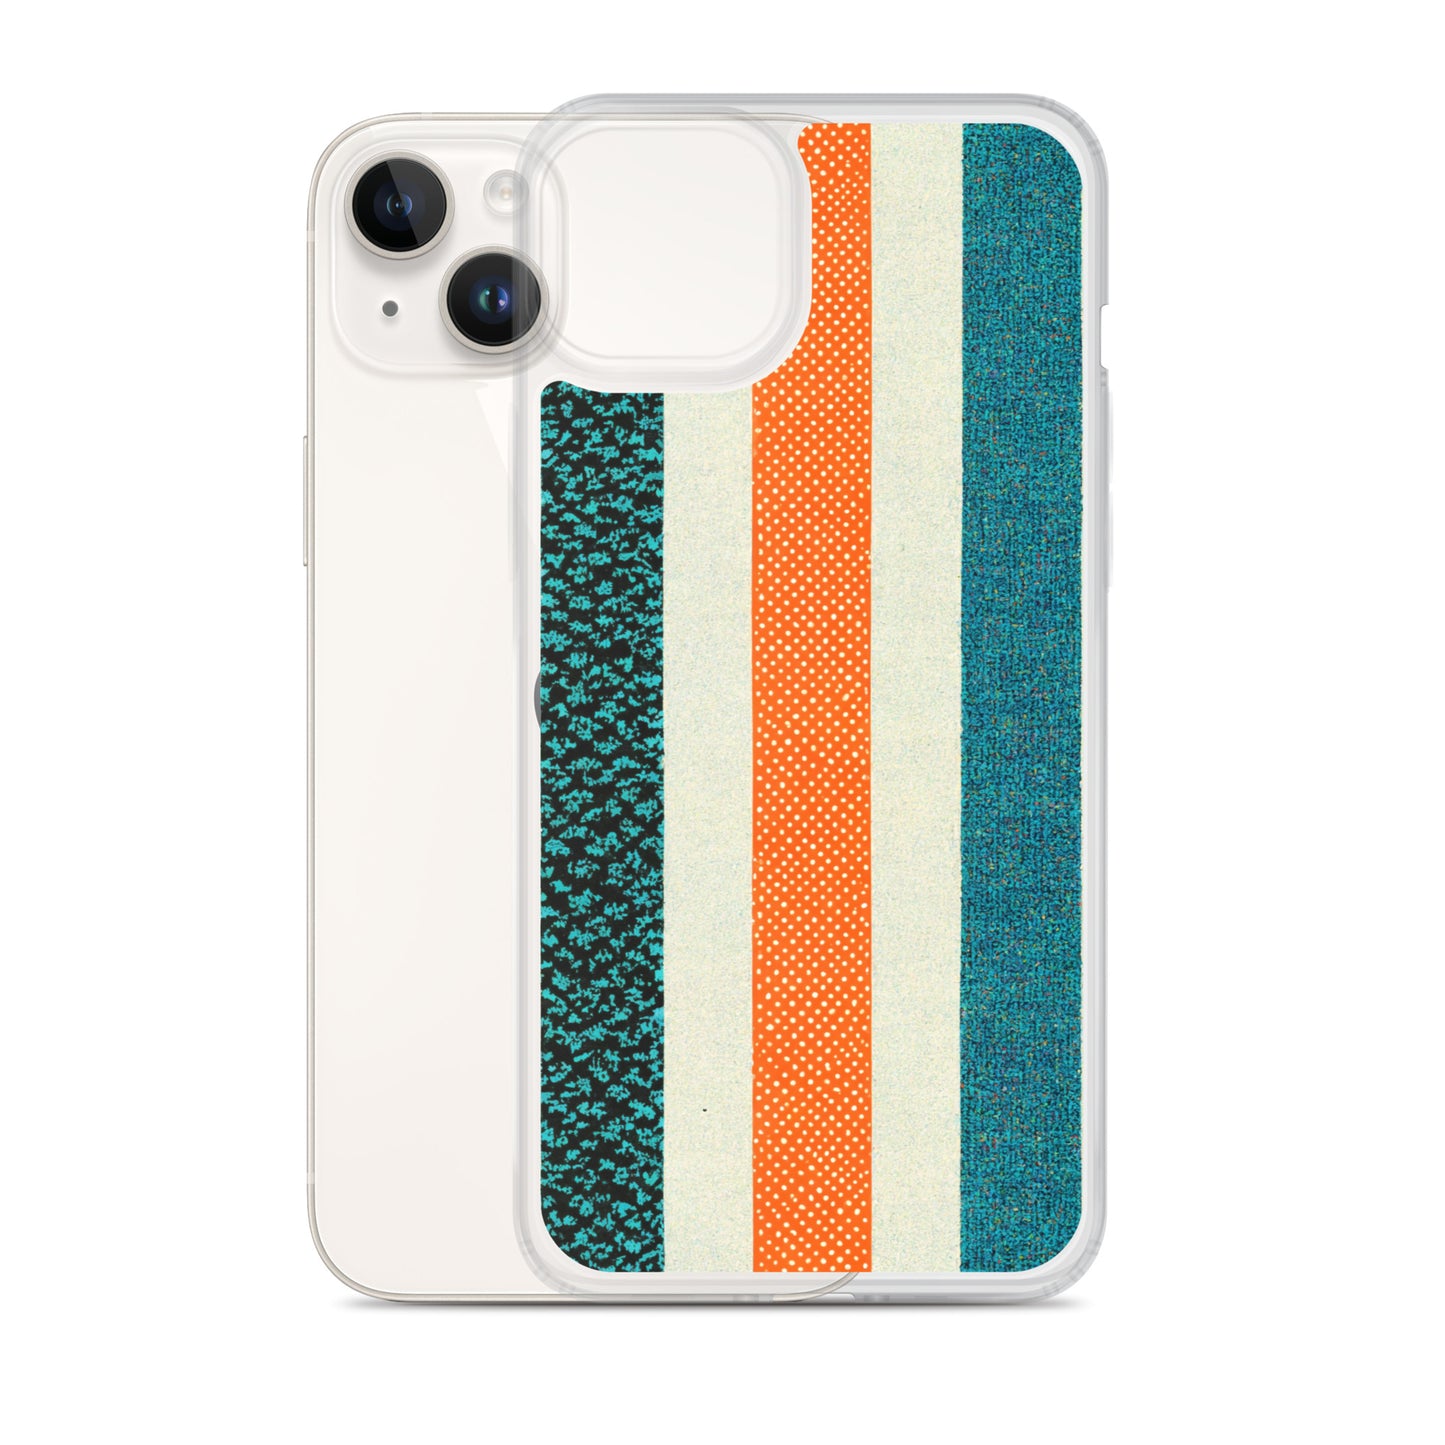 iPhone Case - Bold Patterns #3